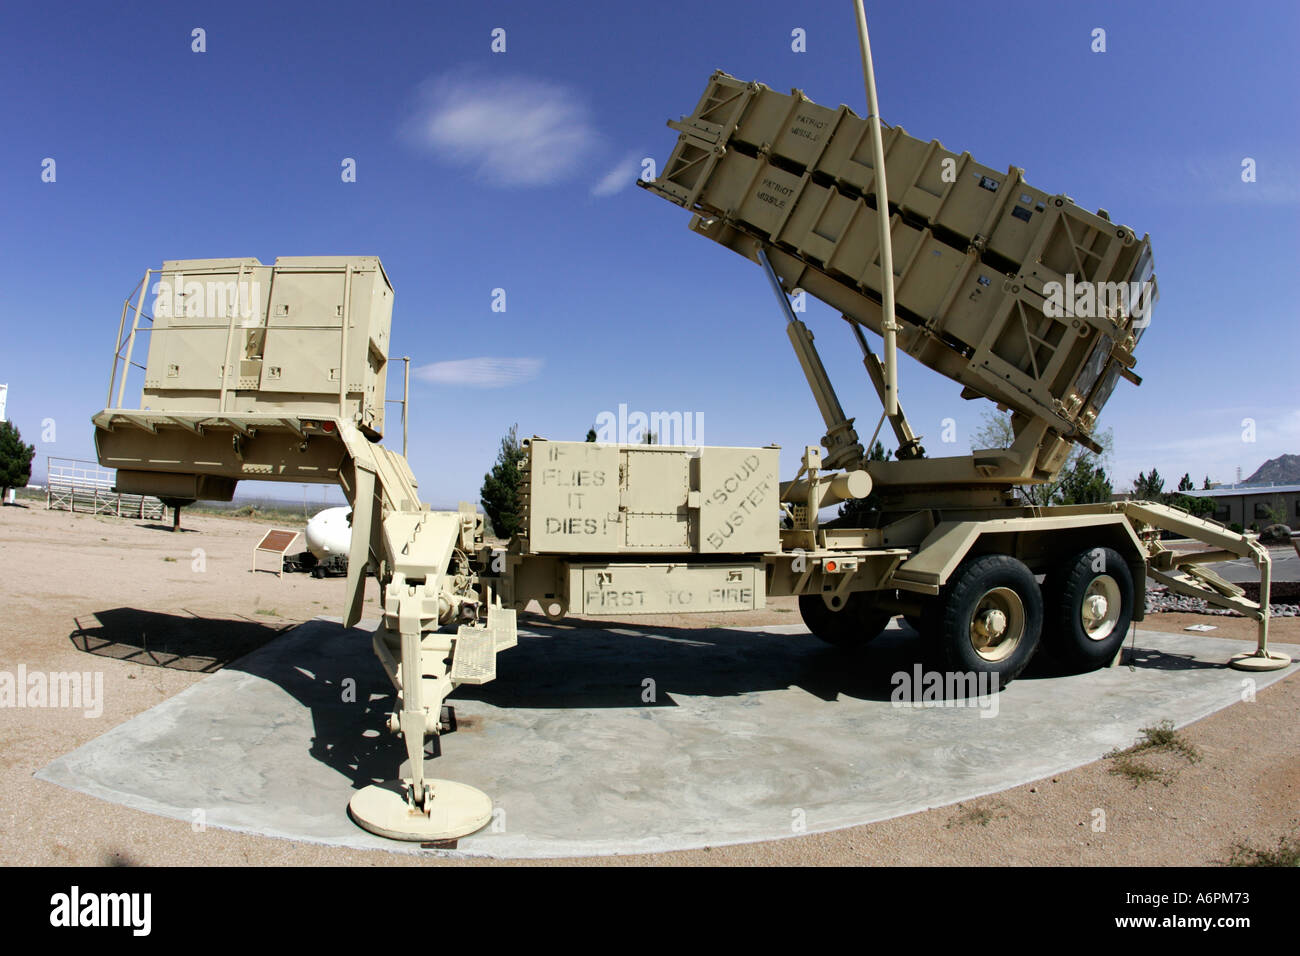 patriot-missile-white-sands-missile-range-museum-new-mexico-usa-A6PM73.jpg